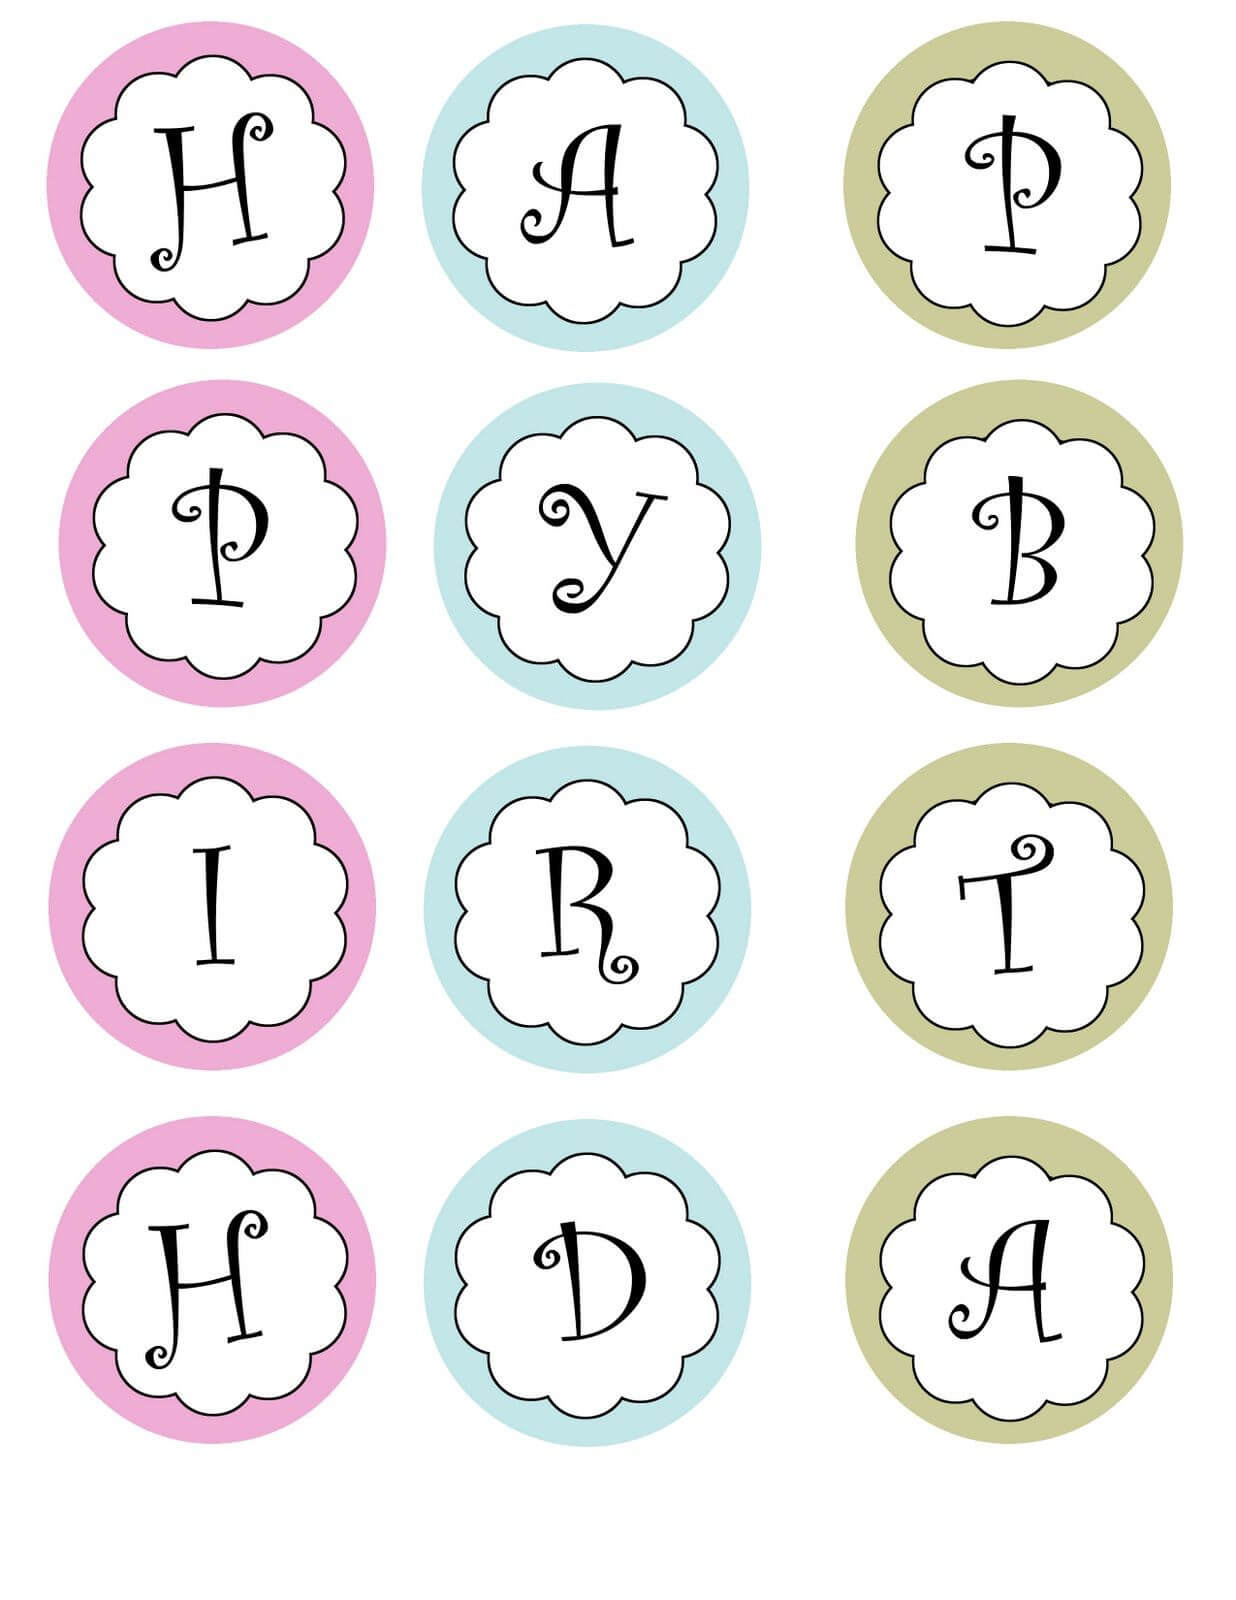 Printable Banners Templates Free | Print Your Own Birthday Regarding Letter Templates For Banners